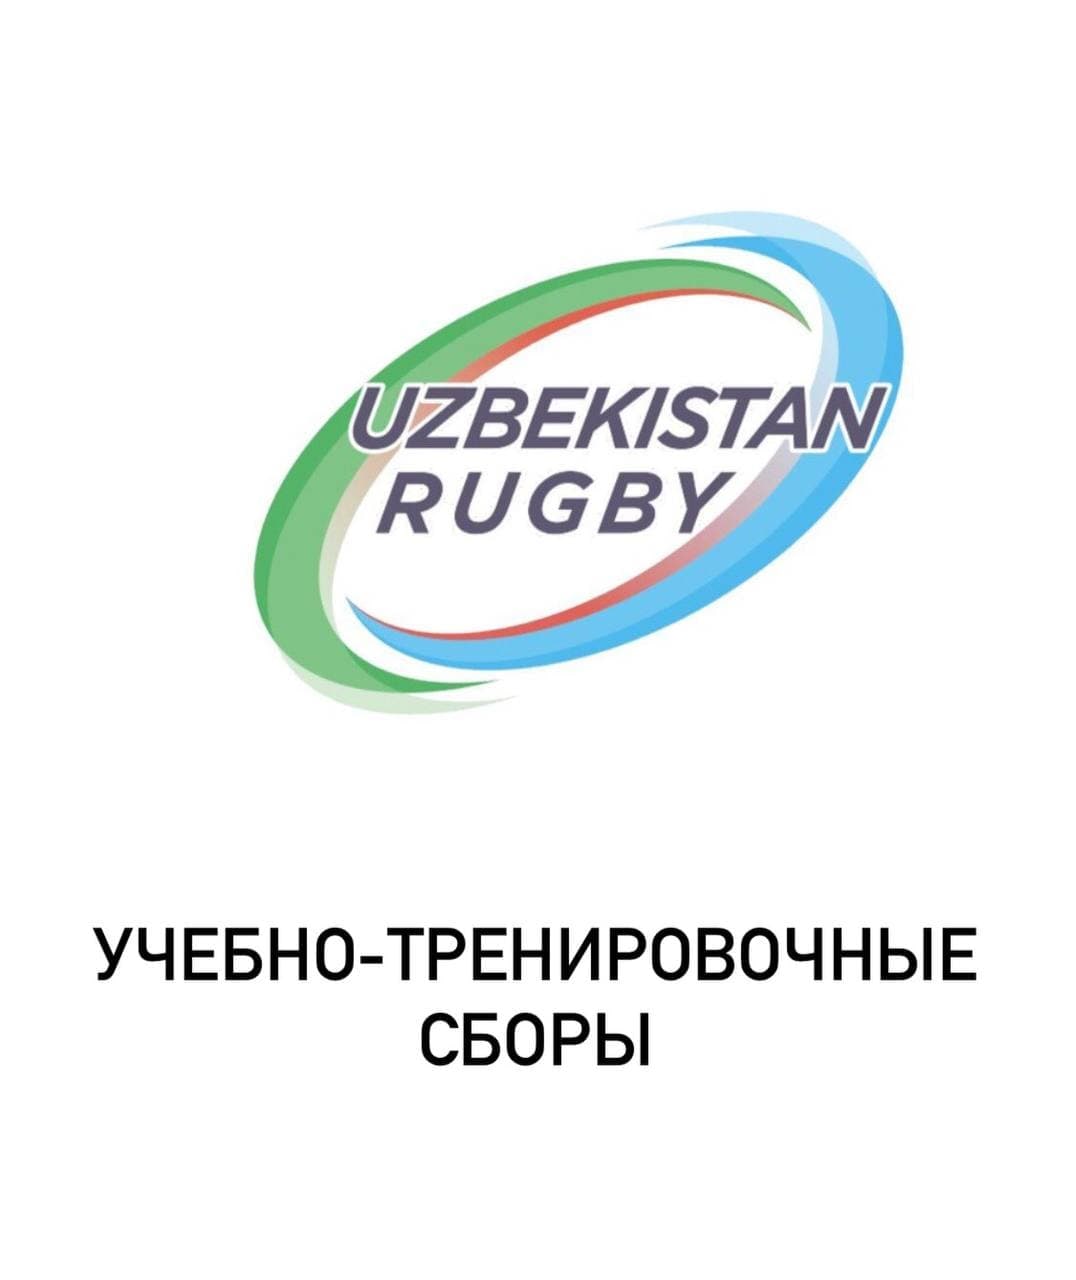 The training camps of the National men’s and women’s national rugby teams of Uzbekistan-7 will be held in Kazakhstan